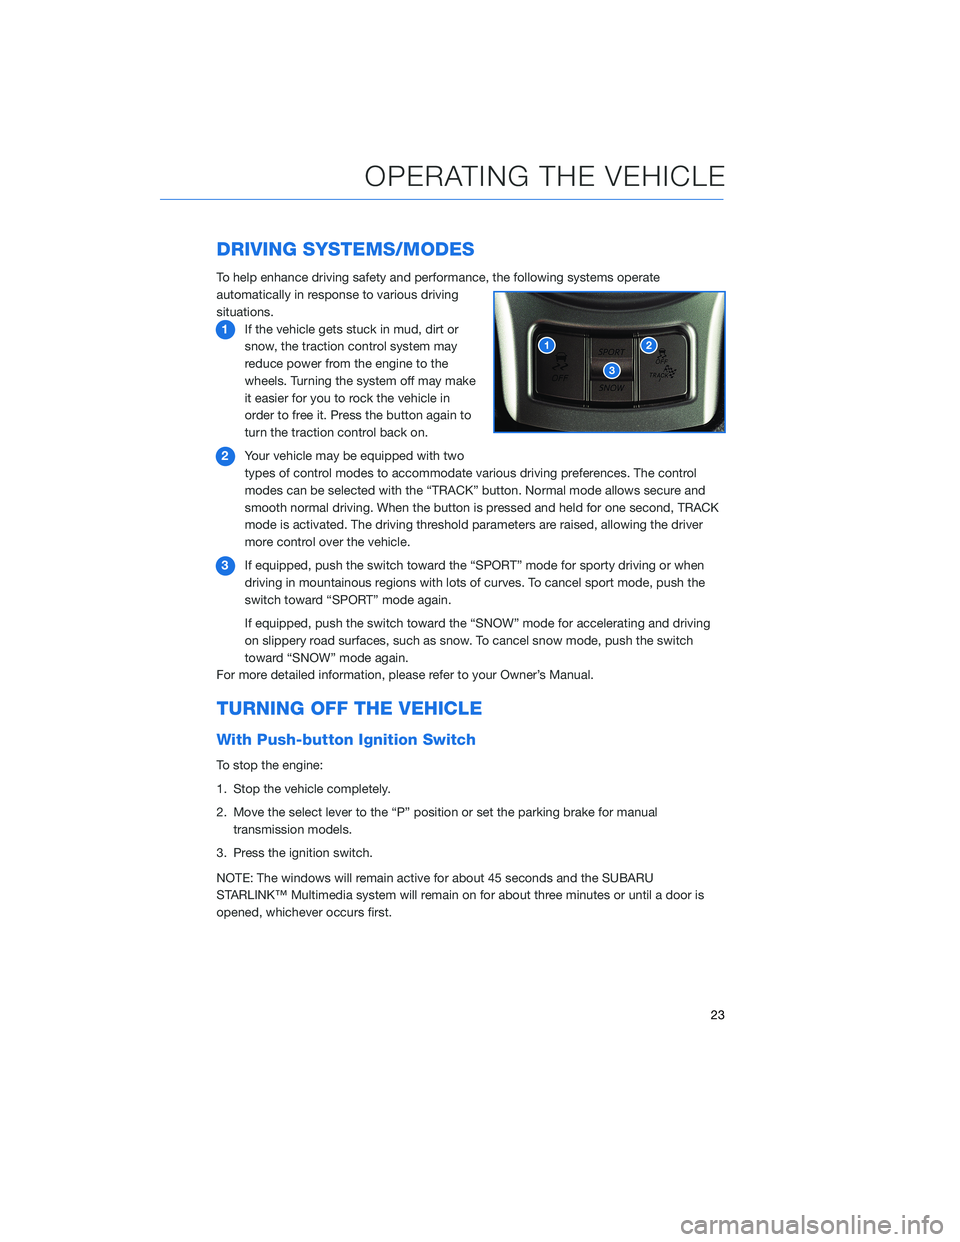 SUBARU BRZ 2020  Quick Guide DRIVING SYSTEMS/MODES
To help enhance driving safety and performance, the following systems operate
automatically in response to various driving
situations.
1If the vehicle gets stuck in mud, dirt or
